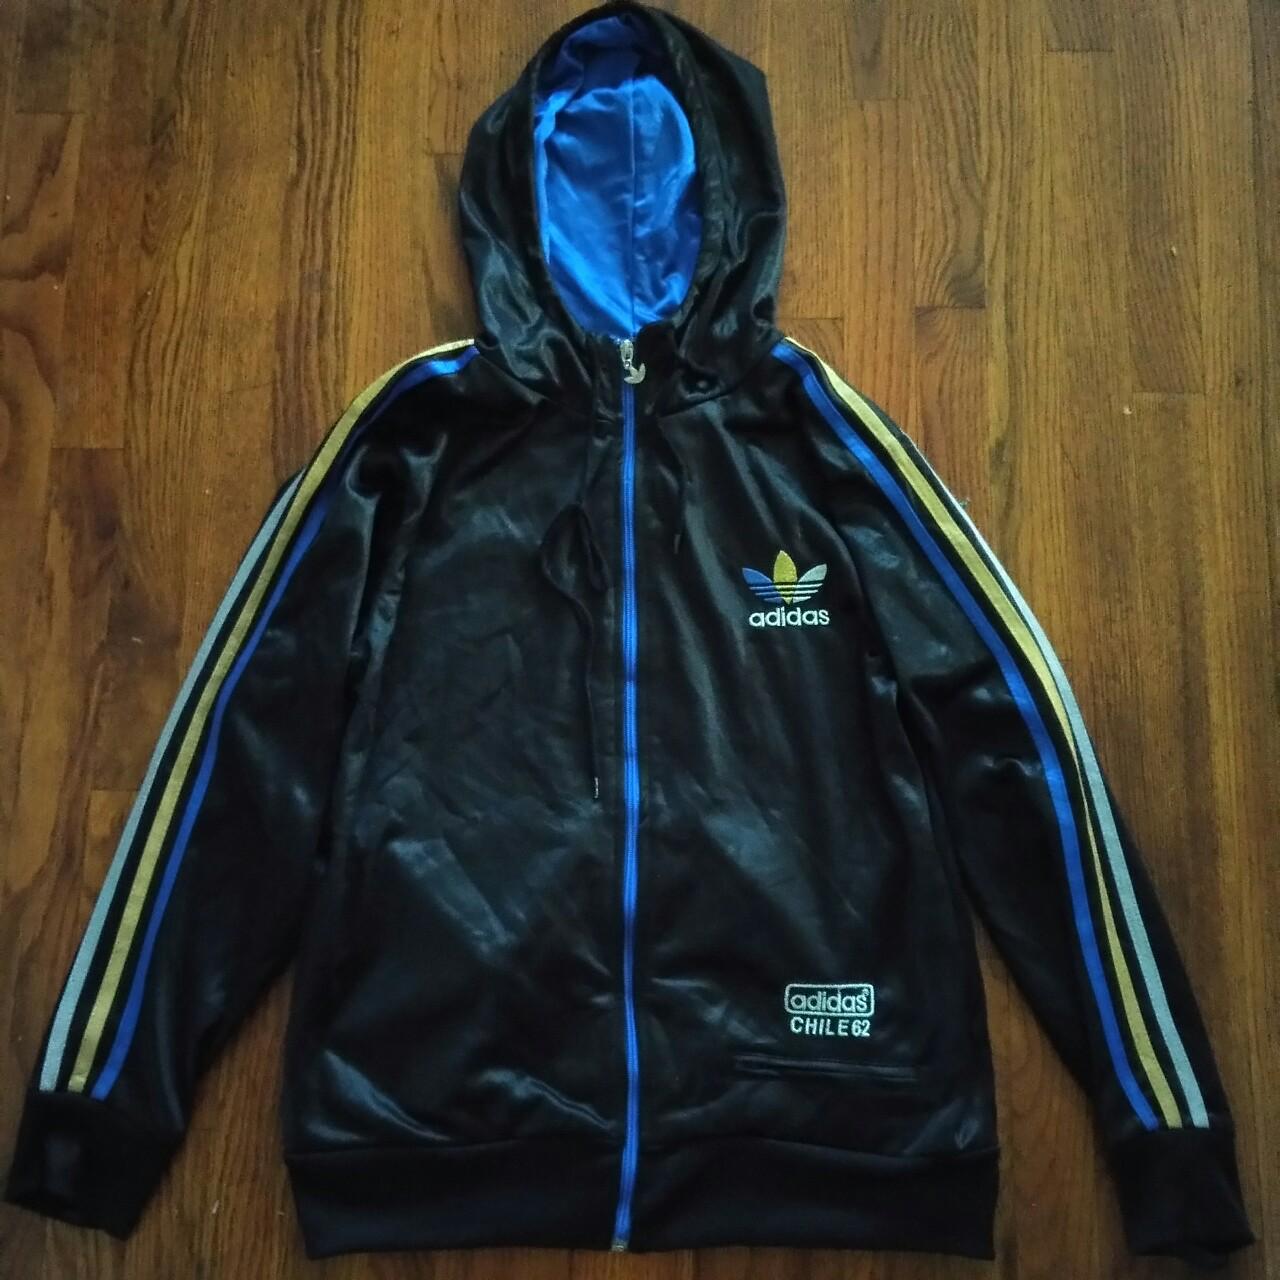 Intenso ensillar Calma Adidas Chile 62 track jacket with a hood. Featuring... - Depop